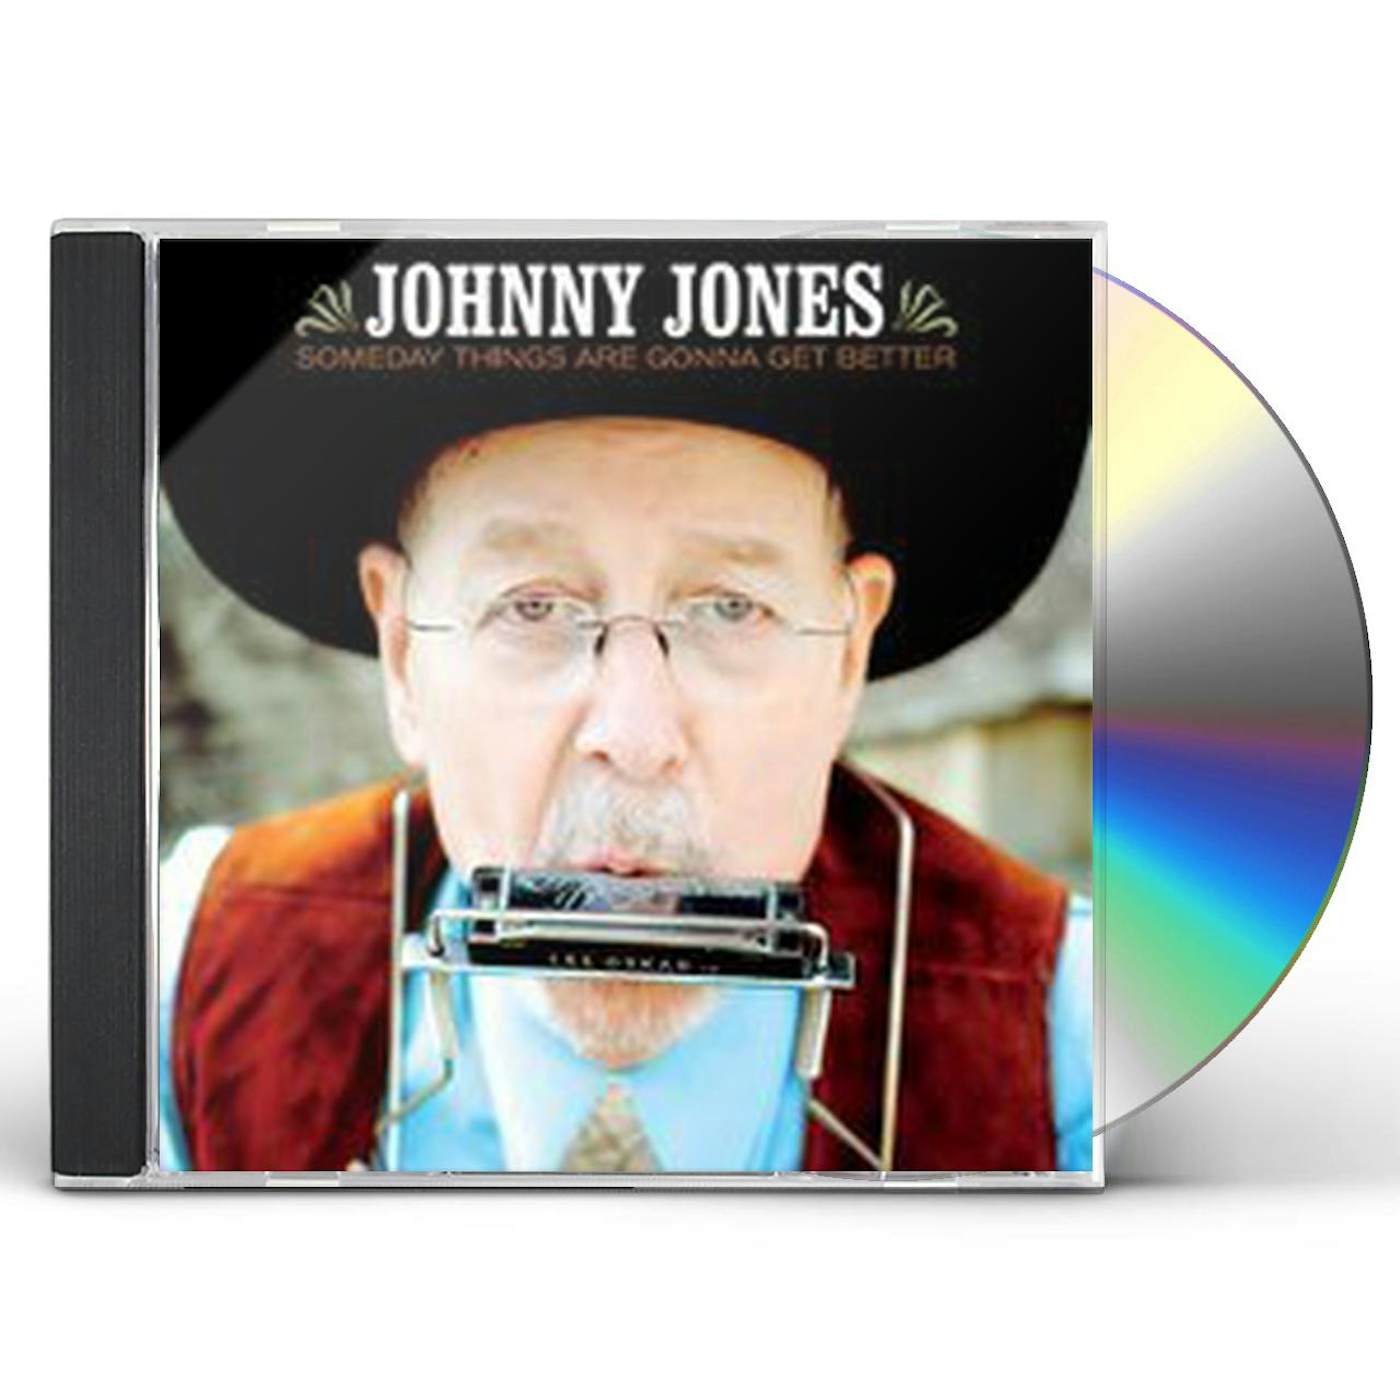 Johnny Jones SOMEDAY THINGS ARE GONNA GET BETTER CD